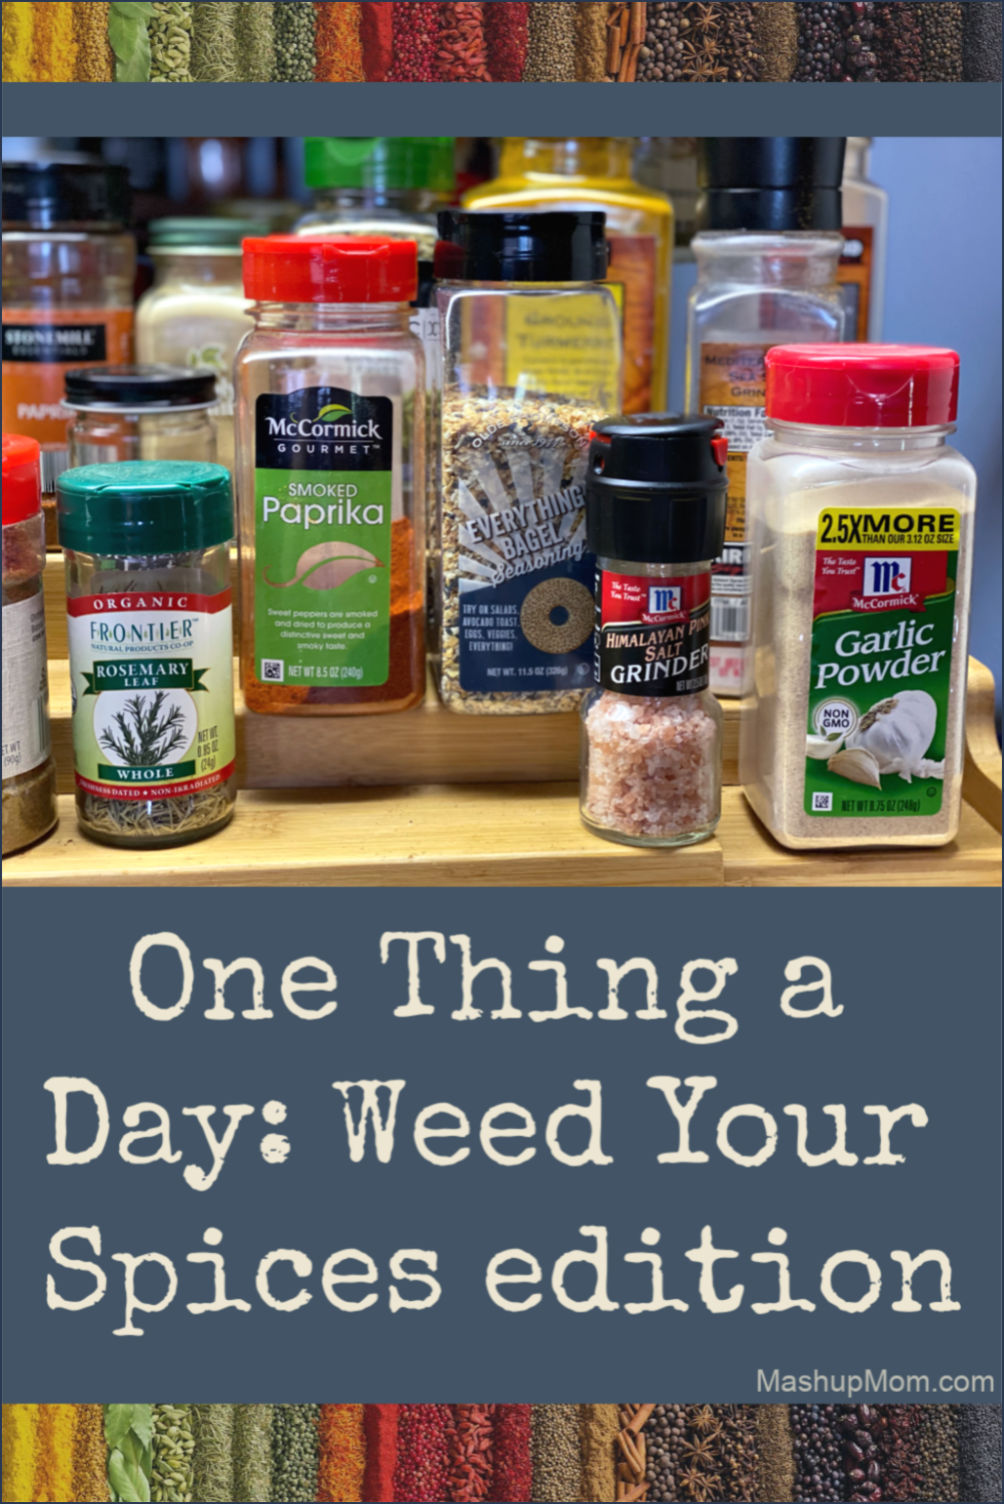 one thing a day: Weed and organize your spices